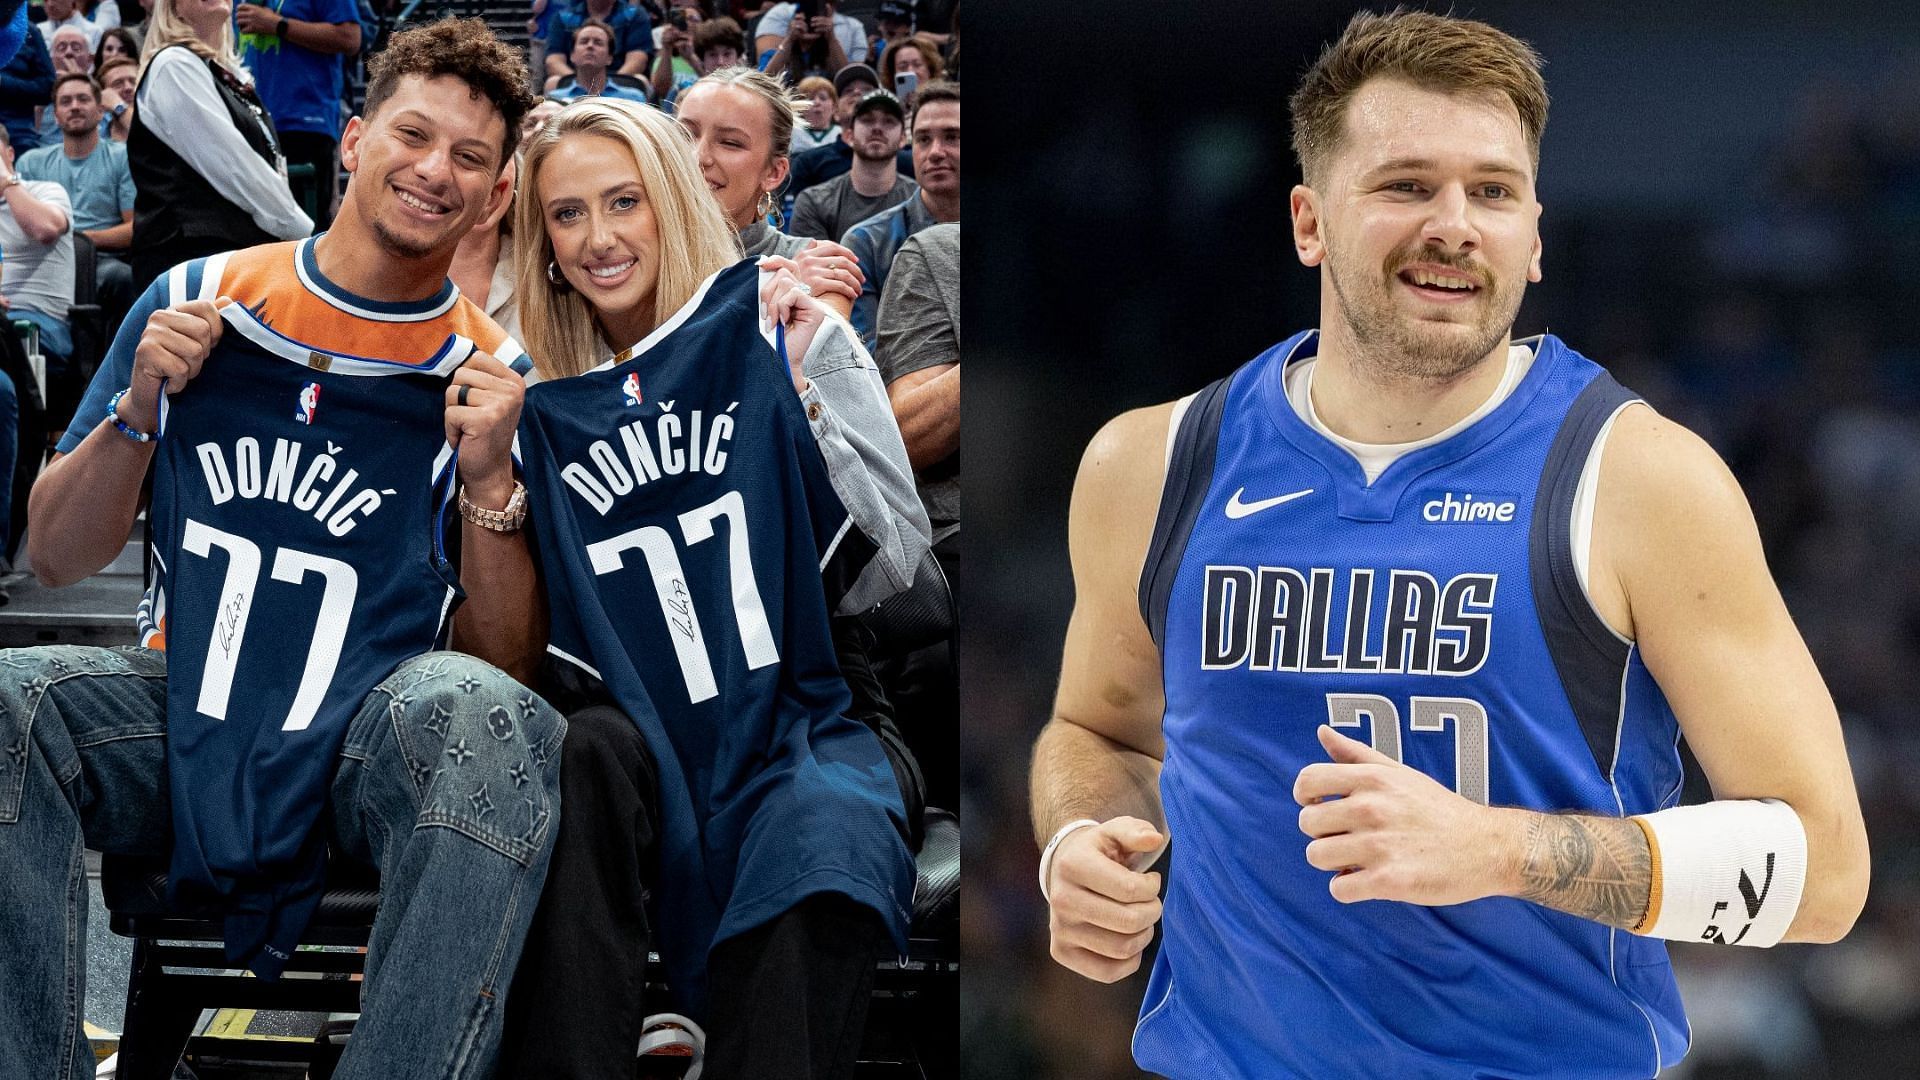 Brittany and Patrick Mahomes showed the autographed jerseys they received from Luka Doncic. (Image credit: Dallas Mavericks on Twitter)